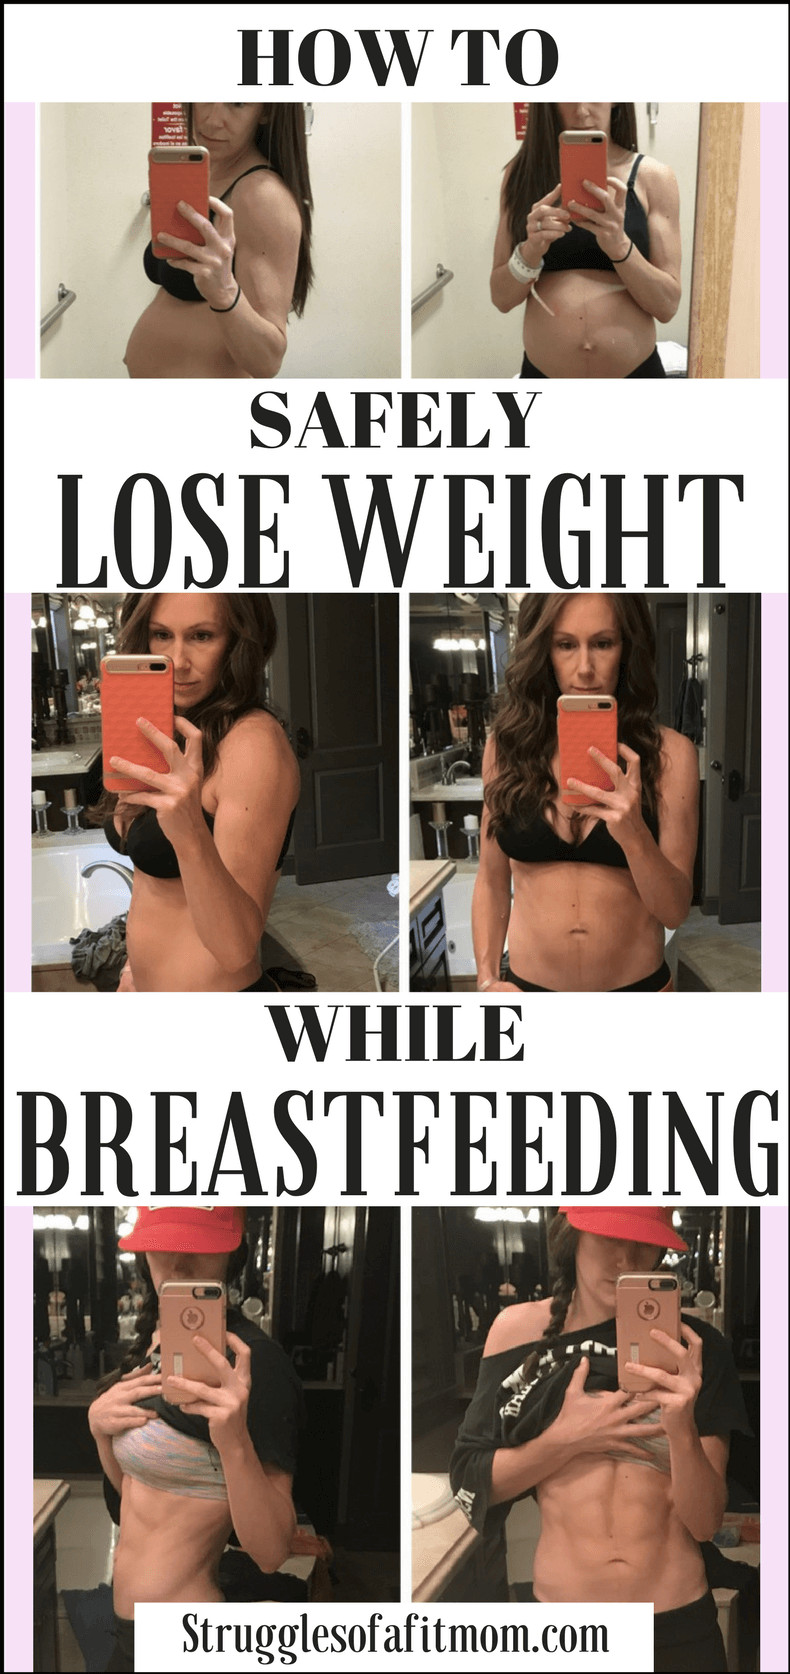 How To Lose Weight While Breastfeeding
 Simple Tips To Help Lose Weight While Breastfeeding